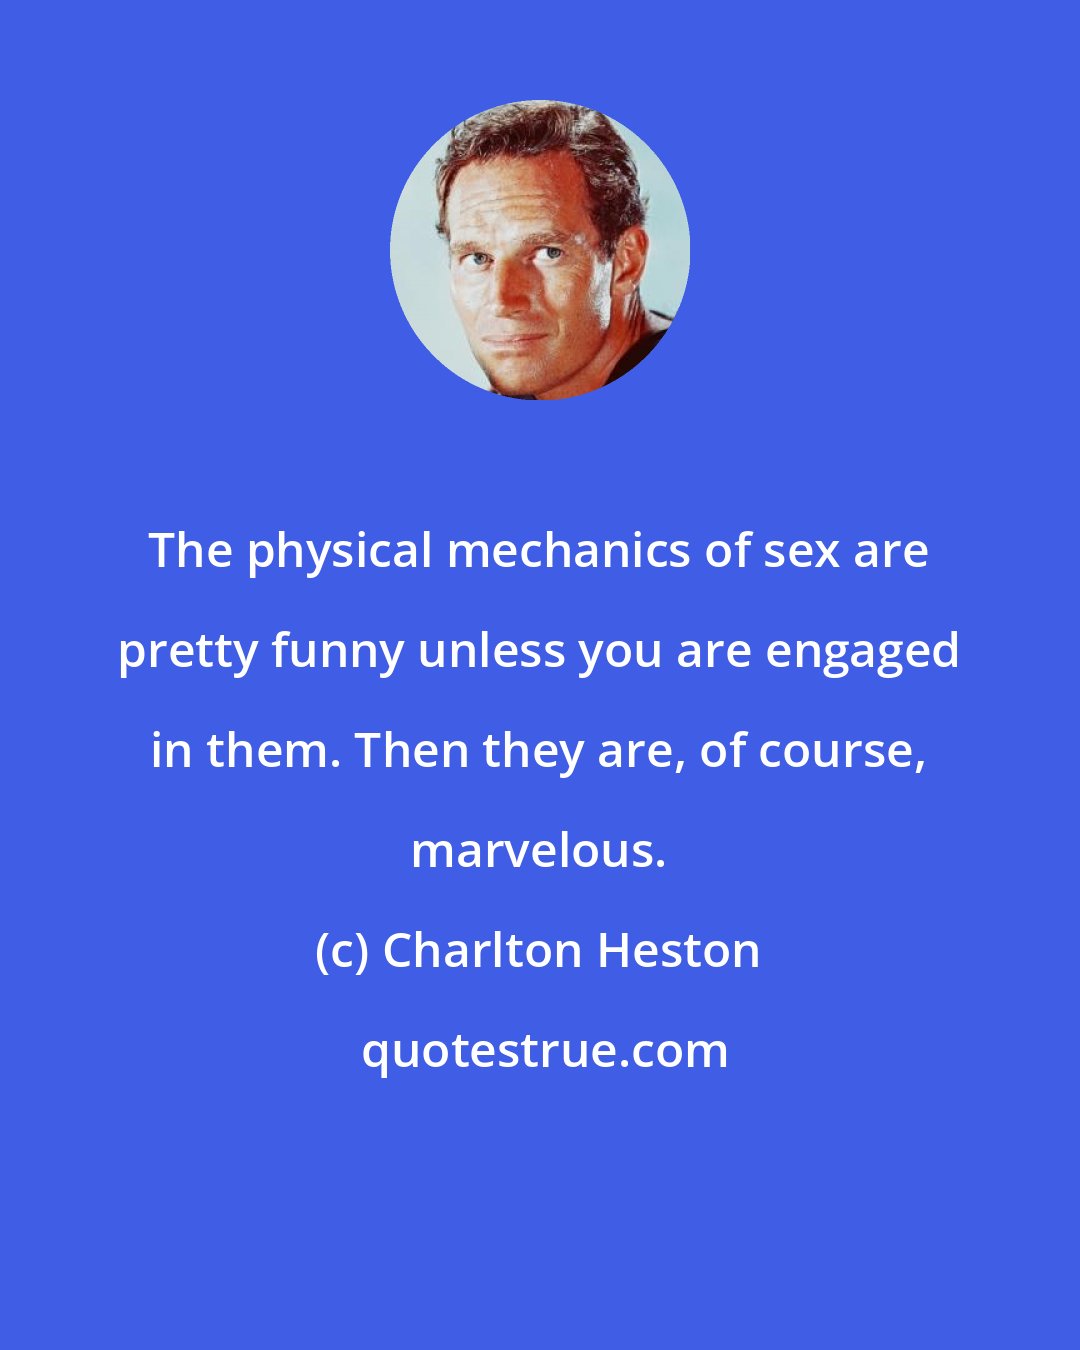 Charlton Heston: The physical mechanics of sex are pretty funny unless you are engaged in them. Then they are, of course, marvelous.